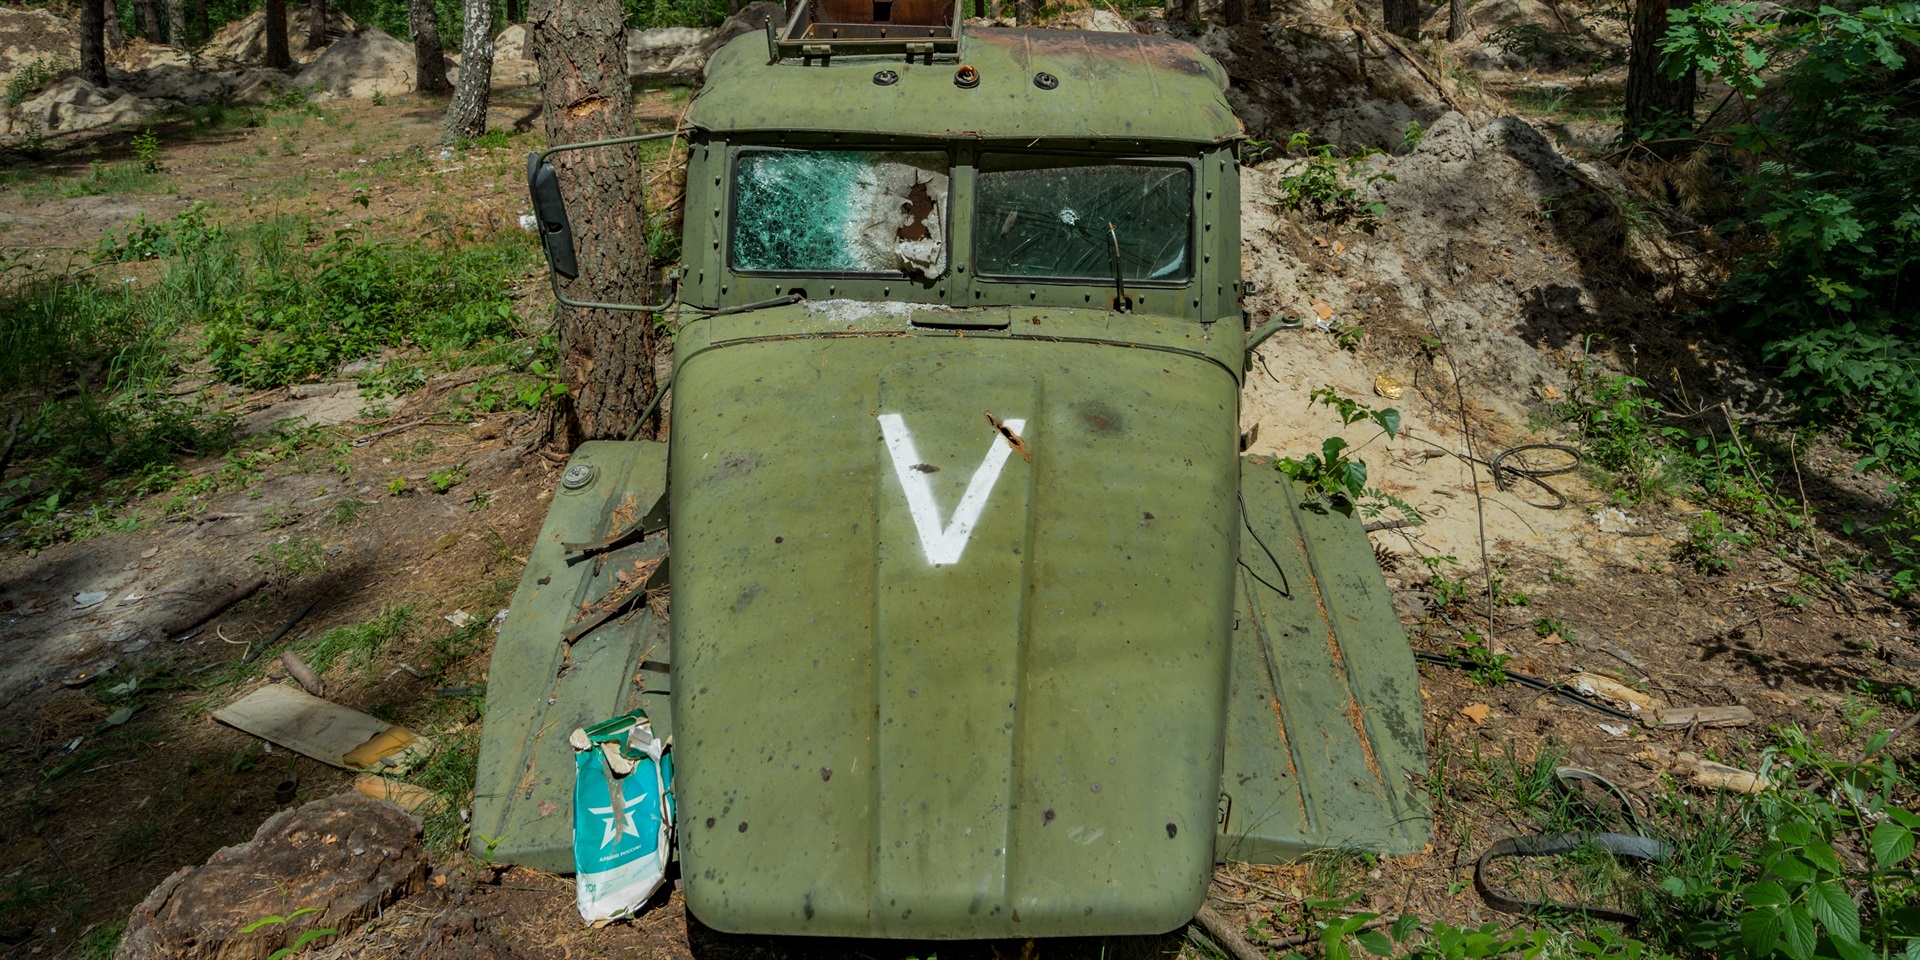 Remains of a Russian truck cabin with the V symbol in the forests around Kyiv.